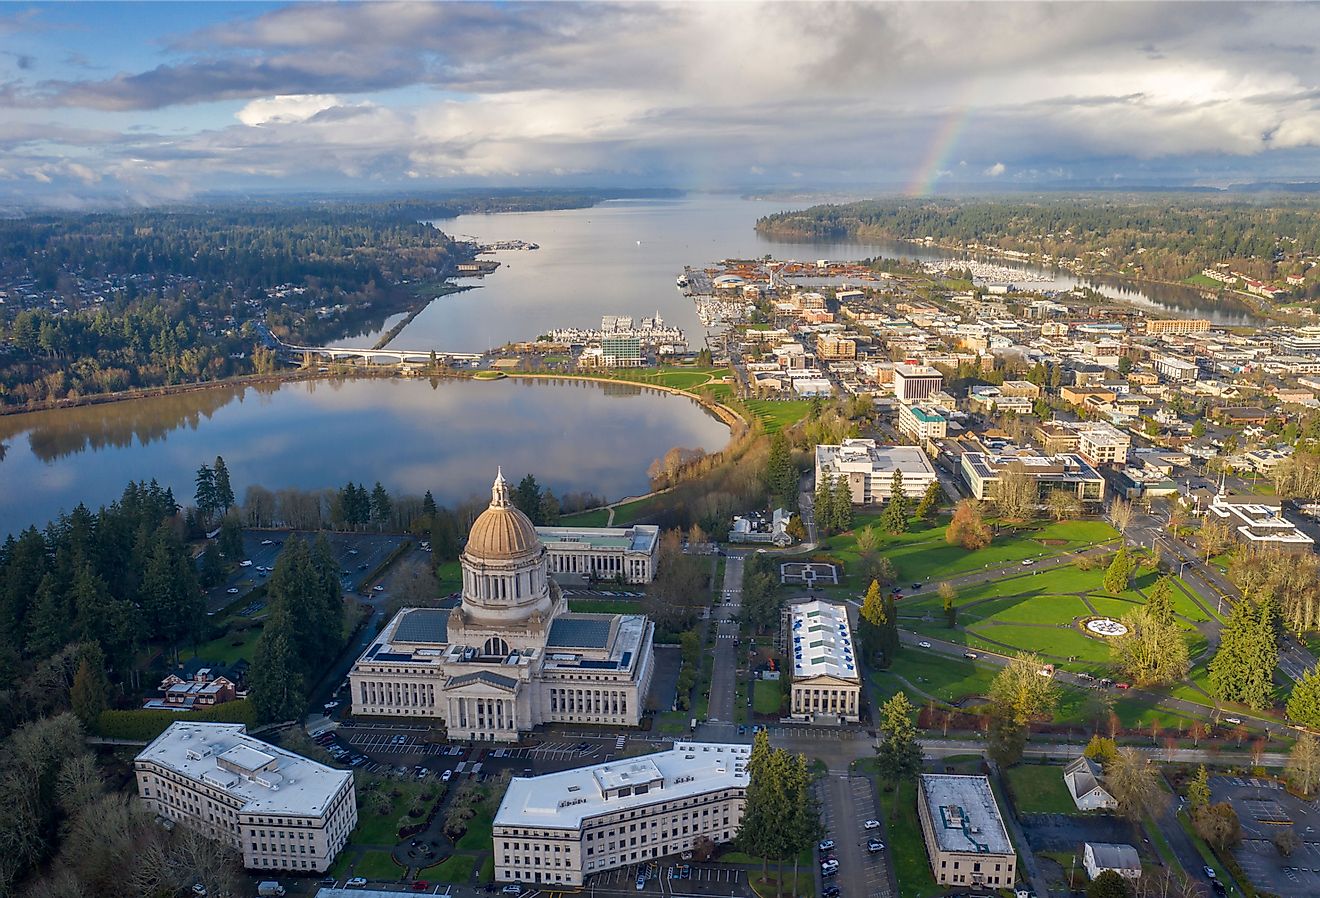 Aerial view of the city of Olympia in Washington state.